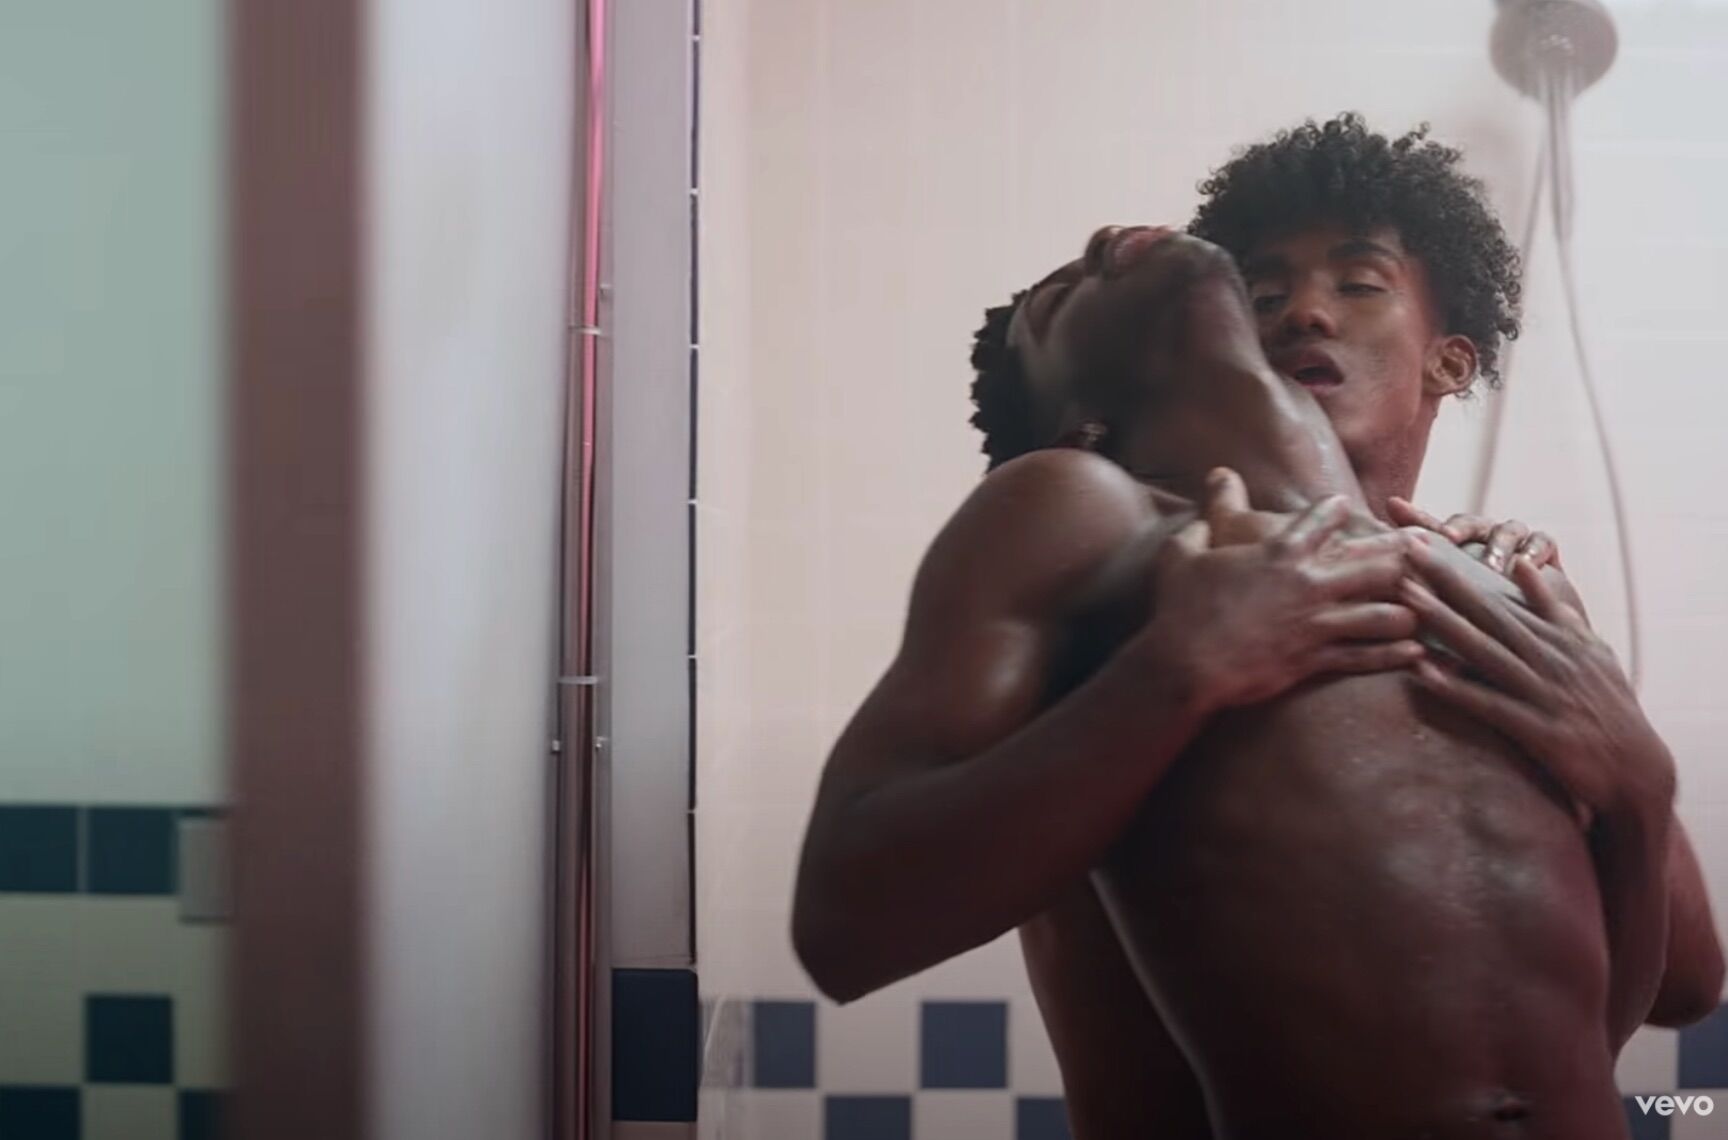 Lil Nas Xs new music video is more explicitly gay than anything else hes done